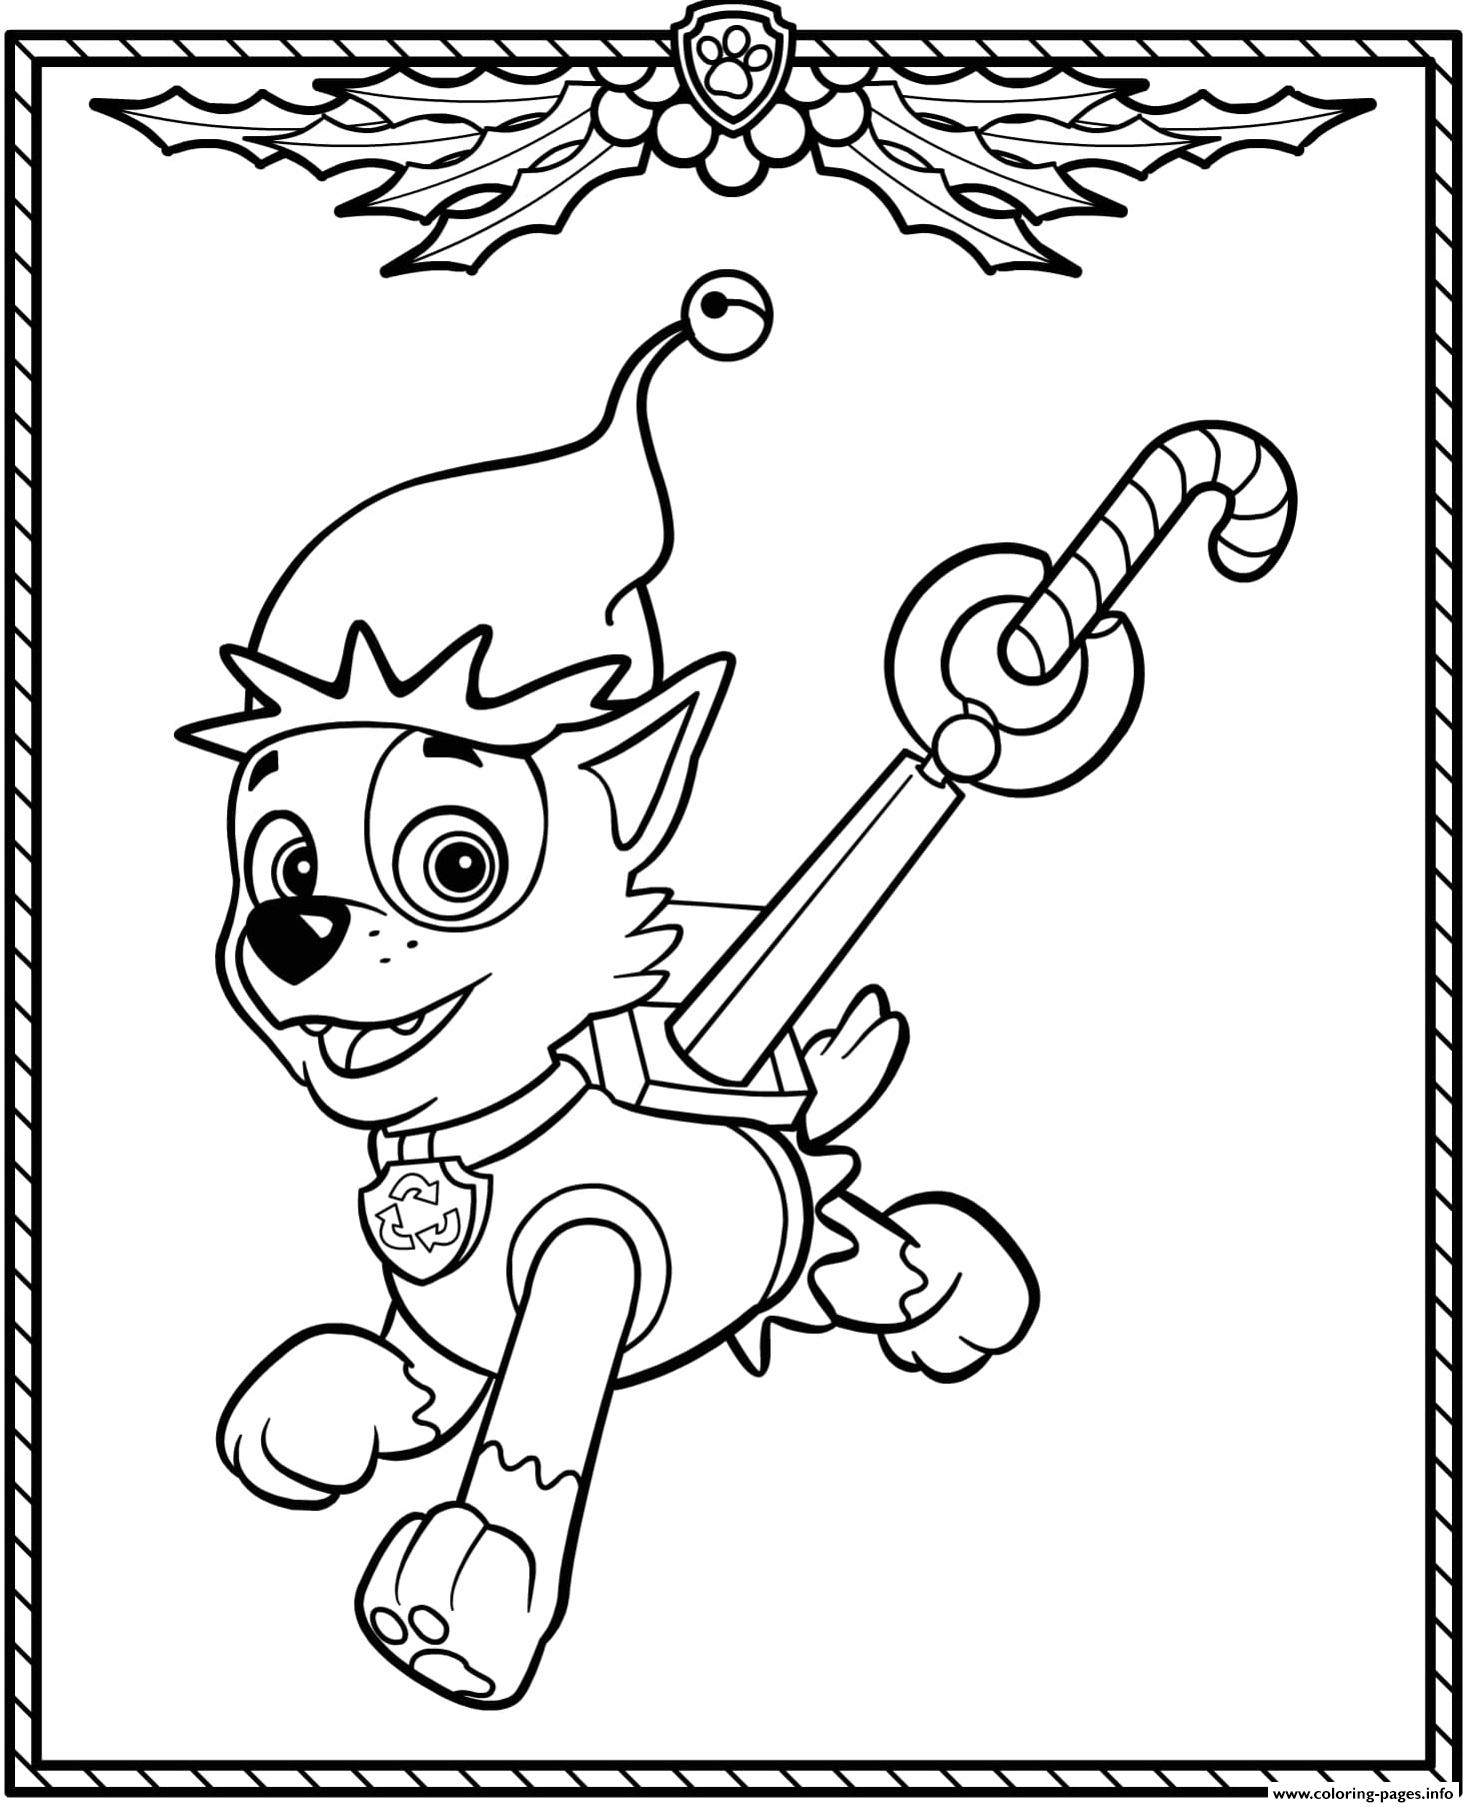 Paw Patrol Christmas Coloring Pages Coloring Home